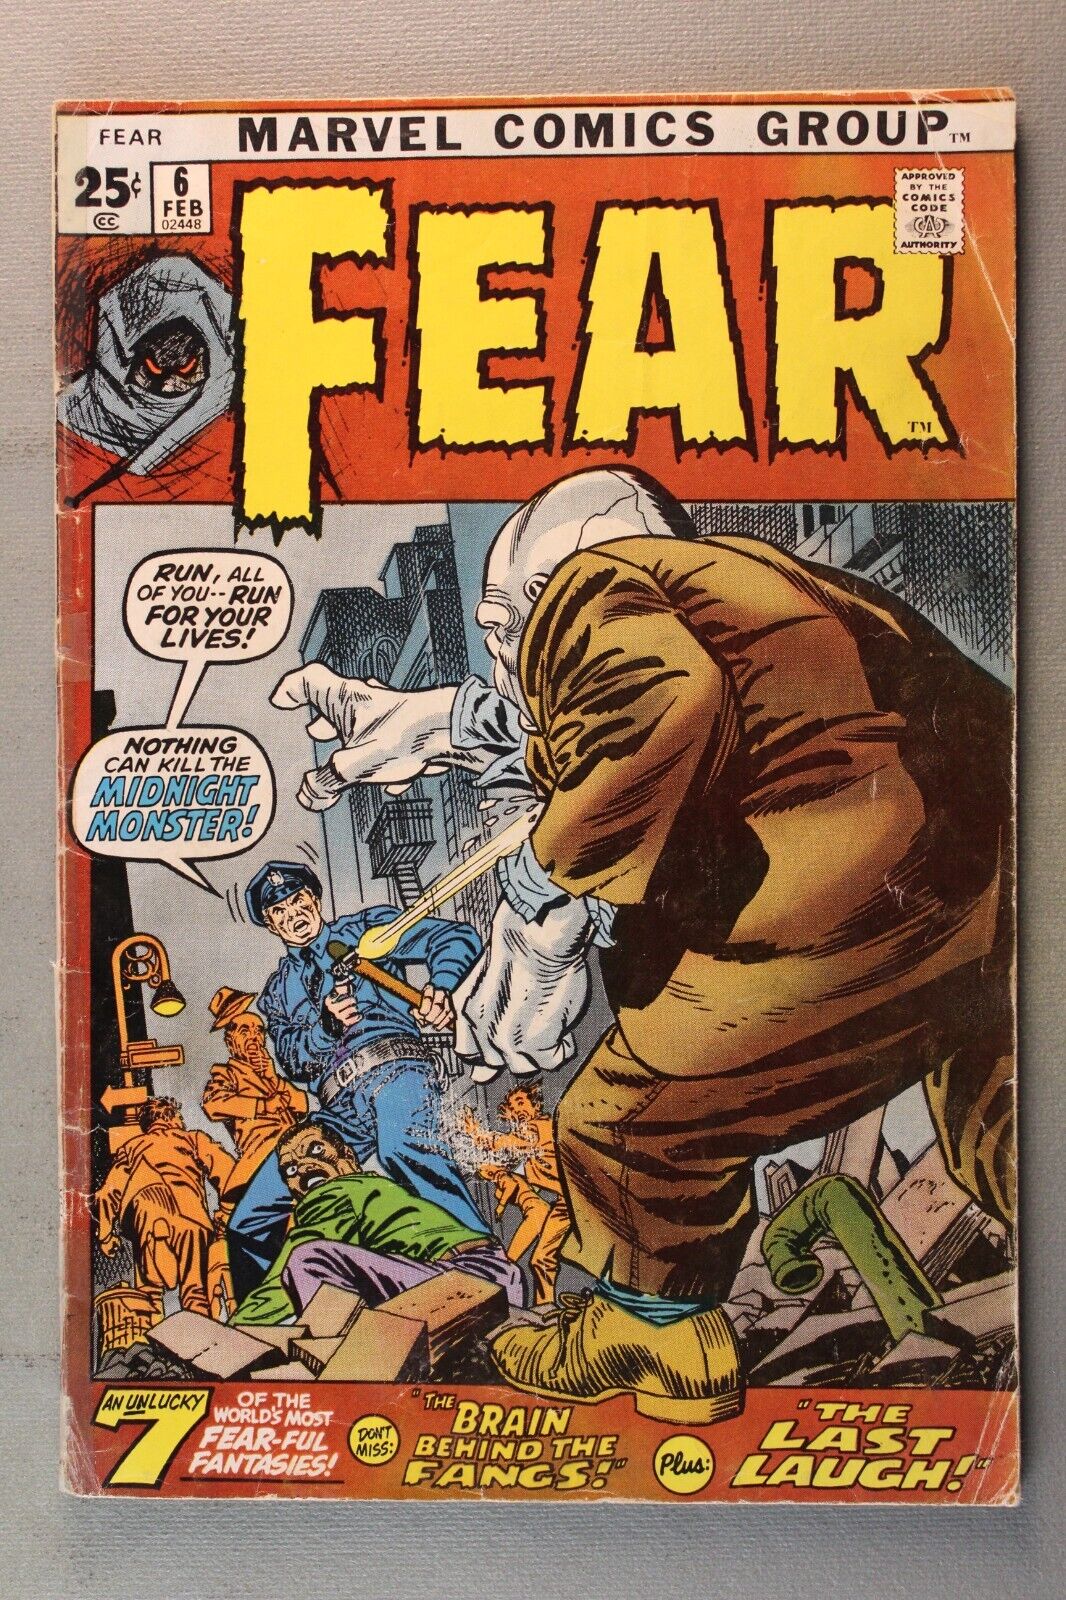 Fear #6 *1972* An Unlucky 7 Of The World\'s Most Fear-Ful Fantasies